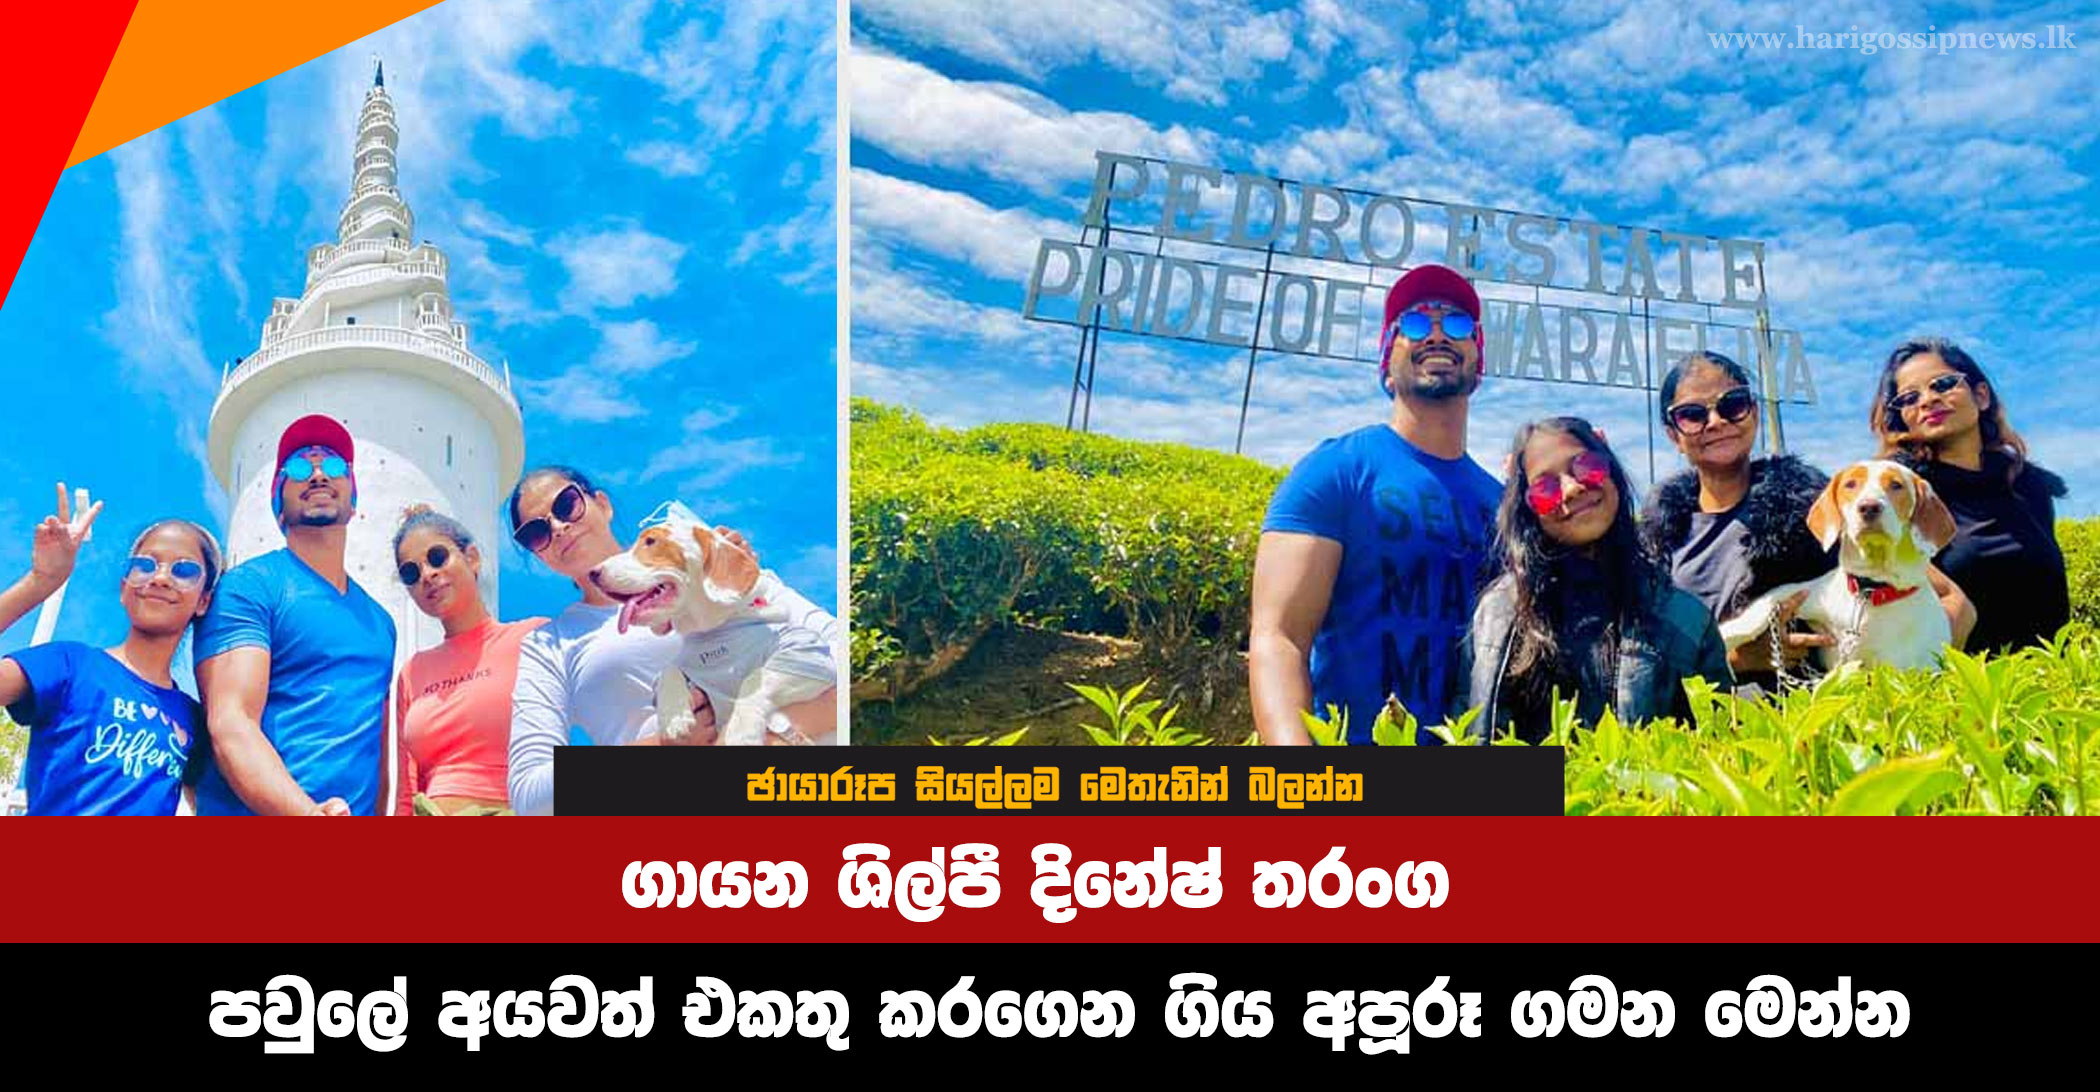 Here is the wonderful journey that singer Dinesh Tharanga took with his family